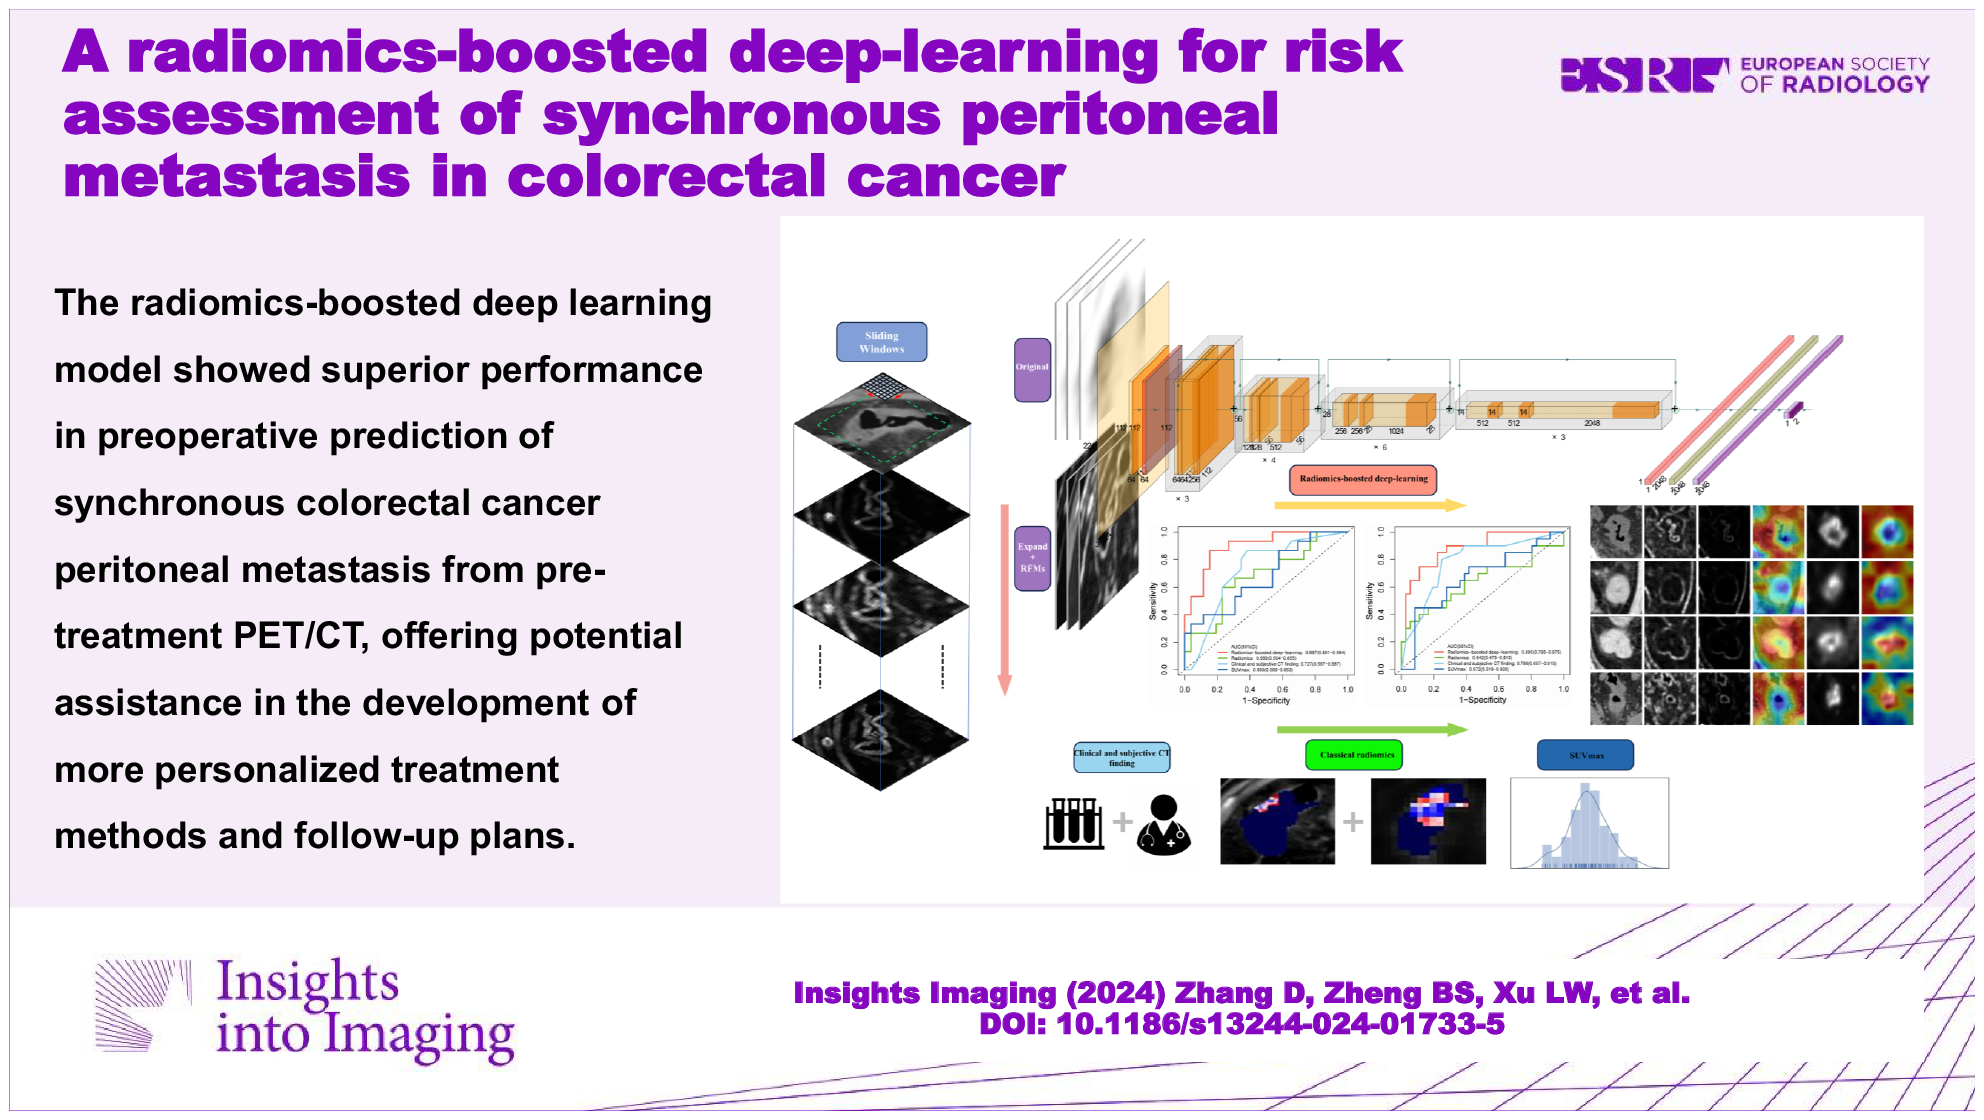 A radiomics-boosted deep-learning for risk assessment of synchronous peritoneal metastasis in colorectal cancer